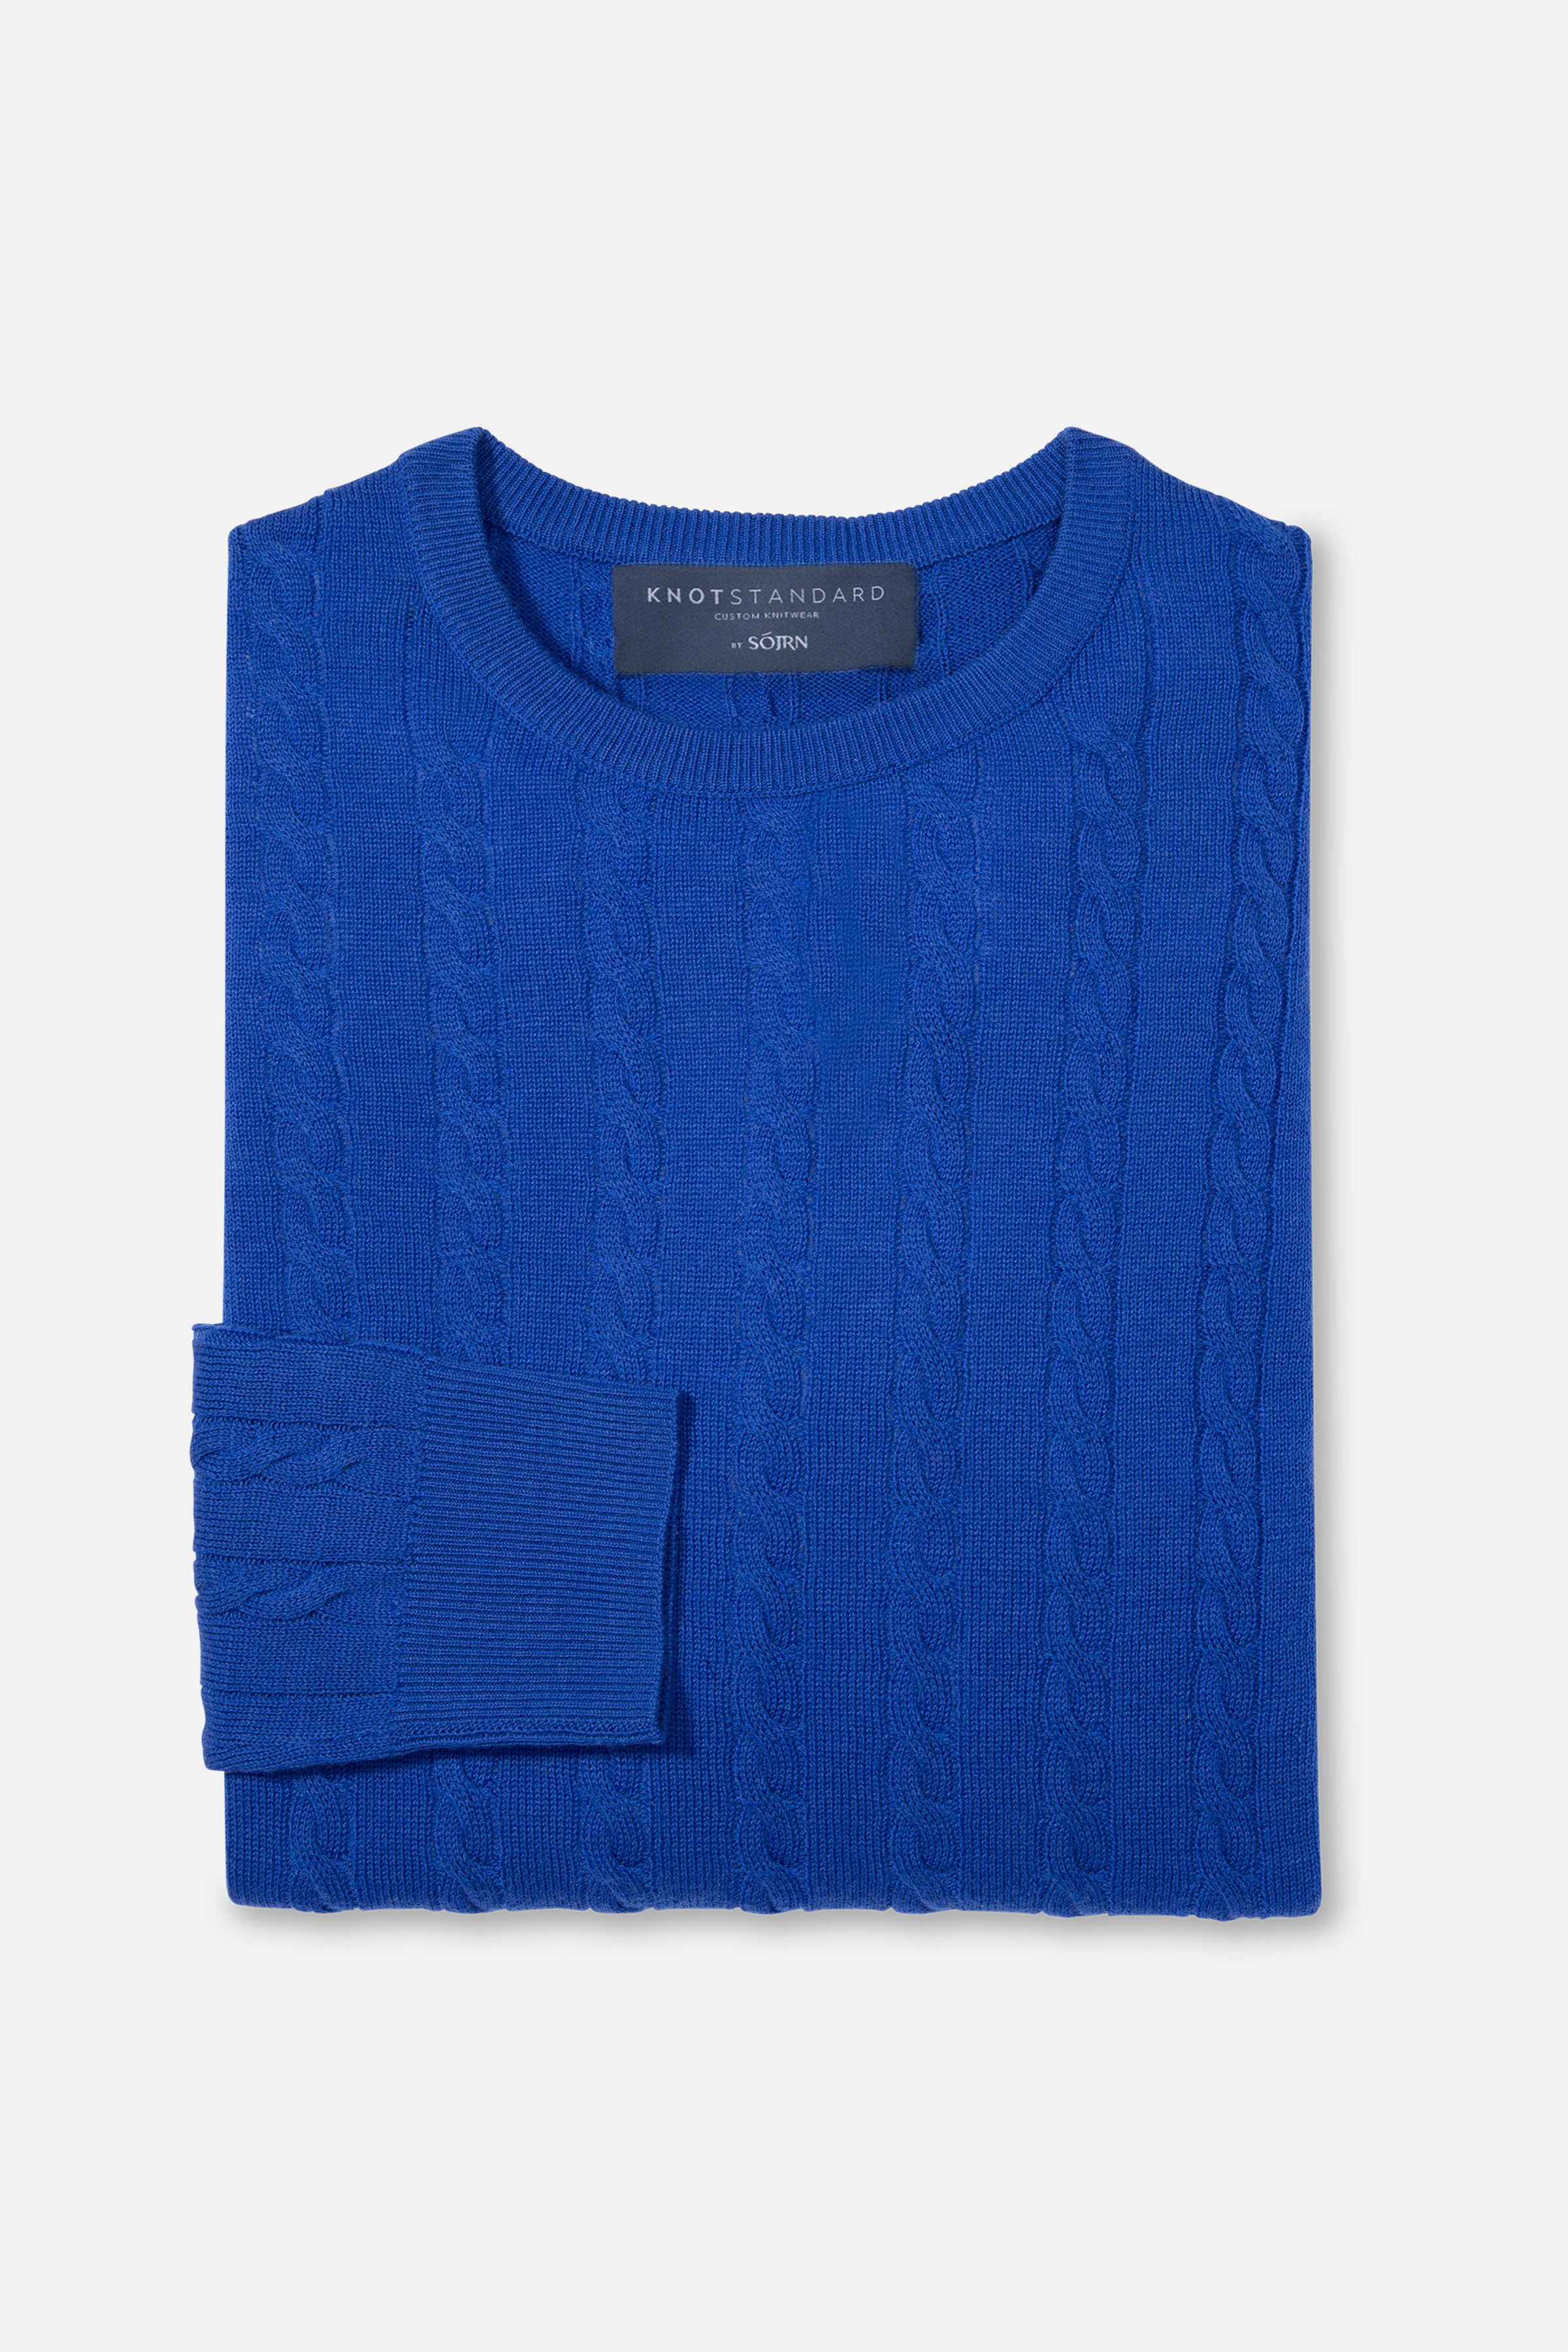 Knot Standard Royal Blue Cable Knit Sweater by Knot Standard